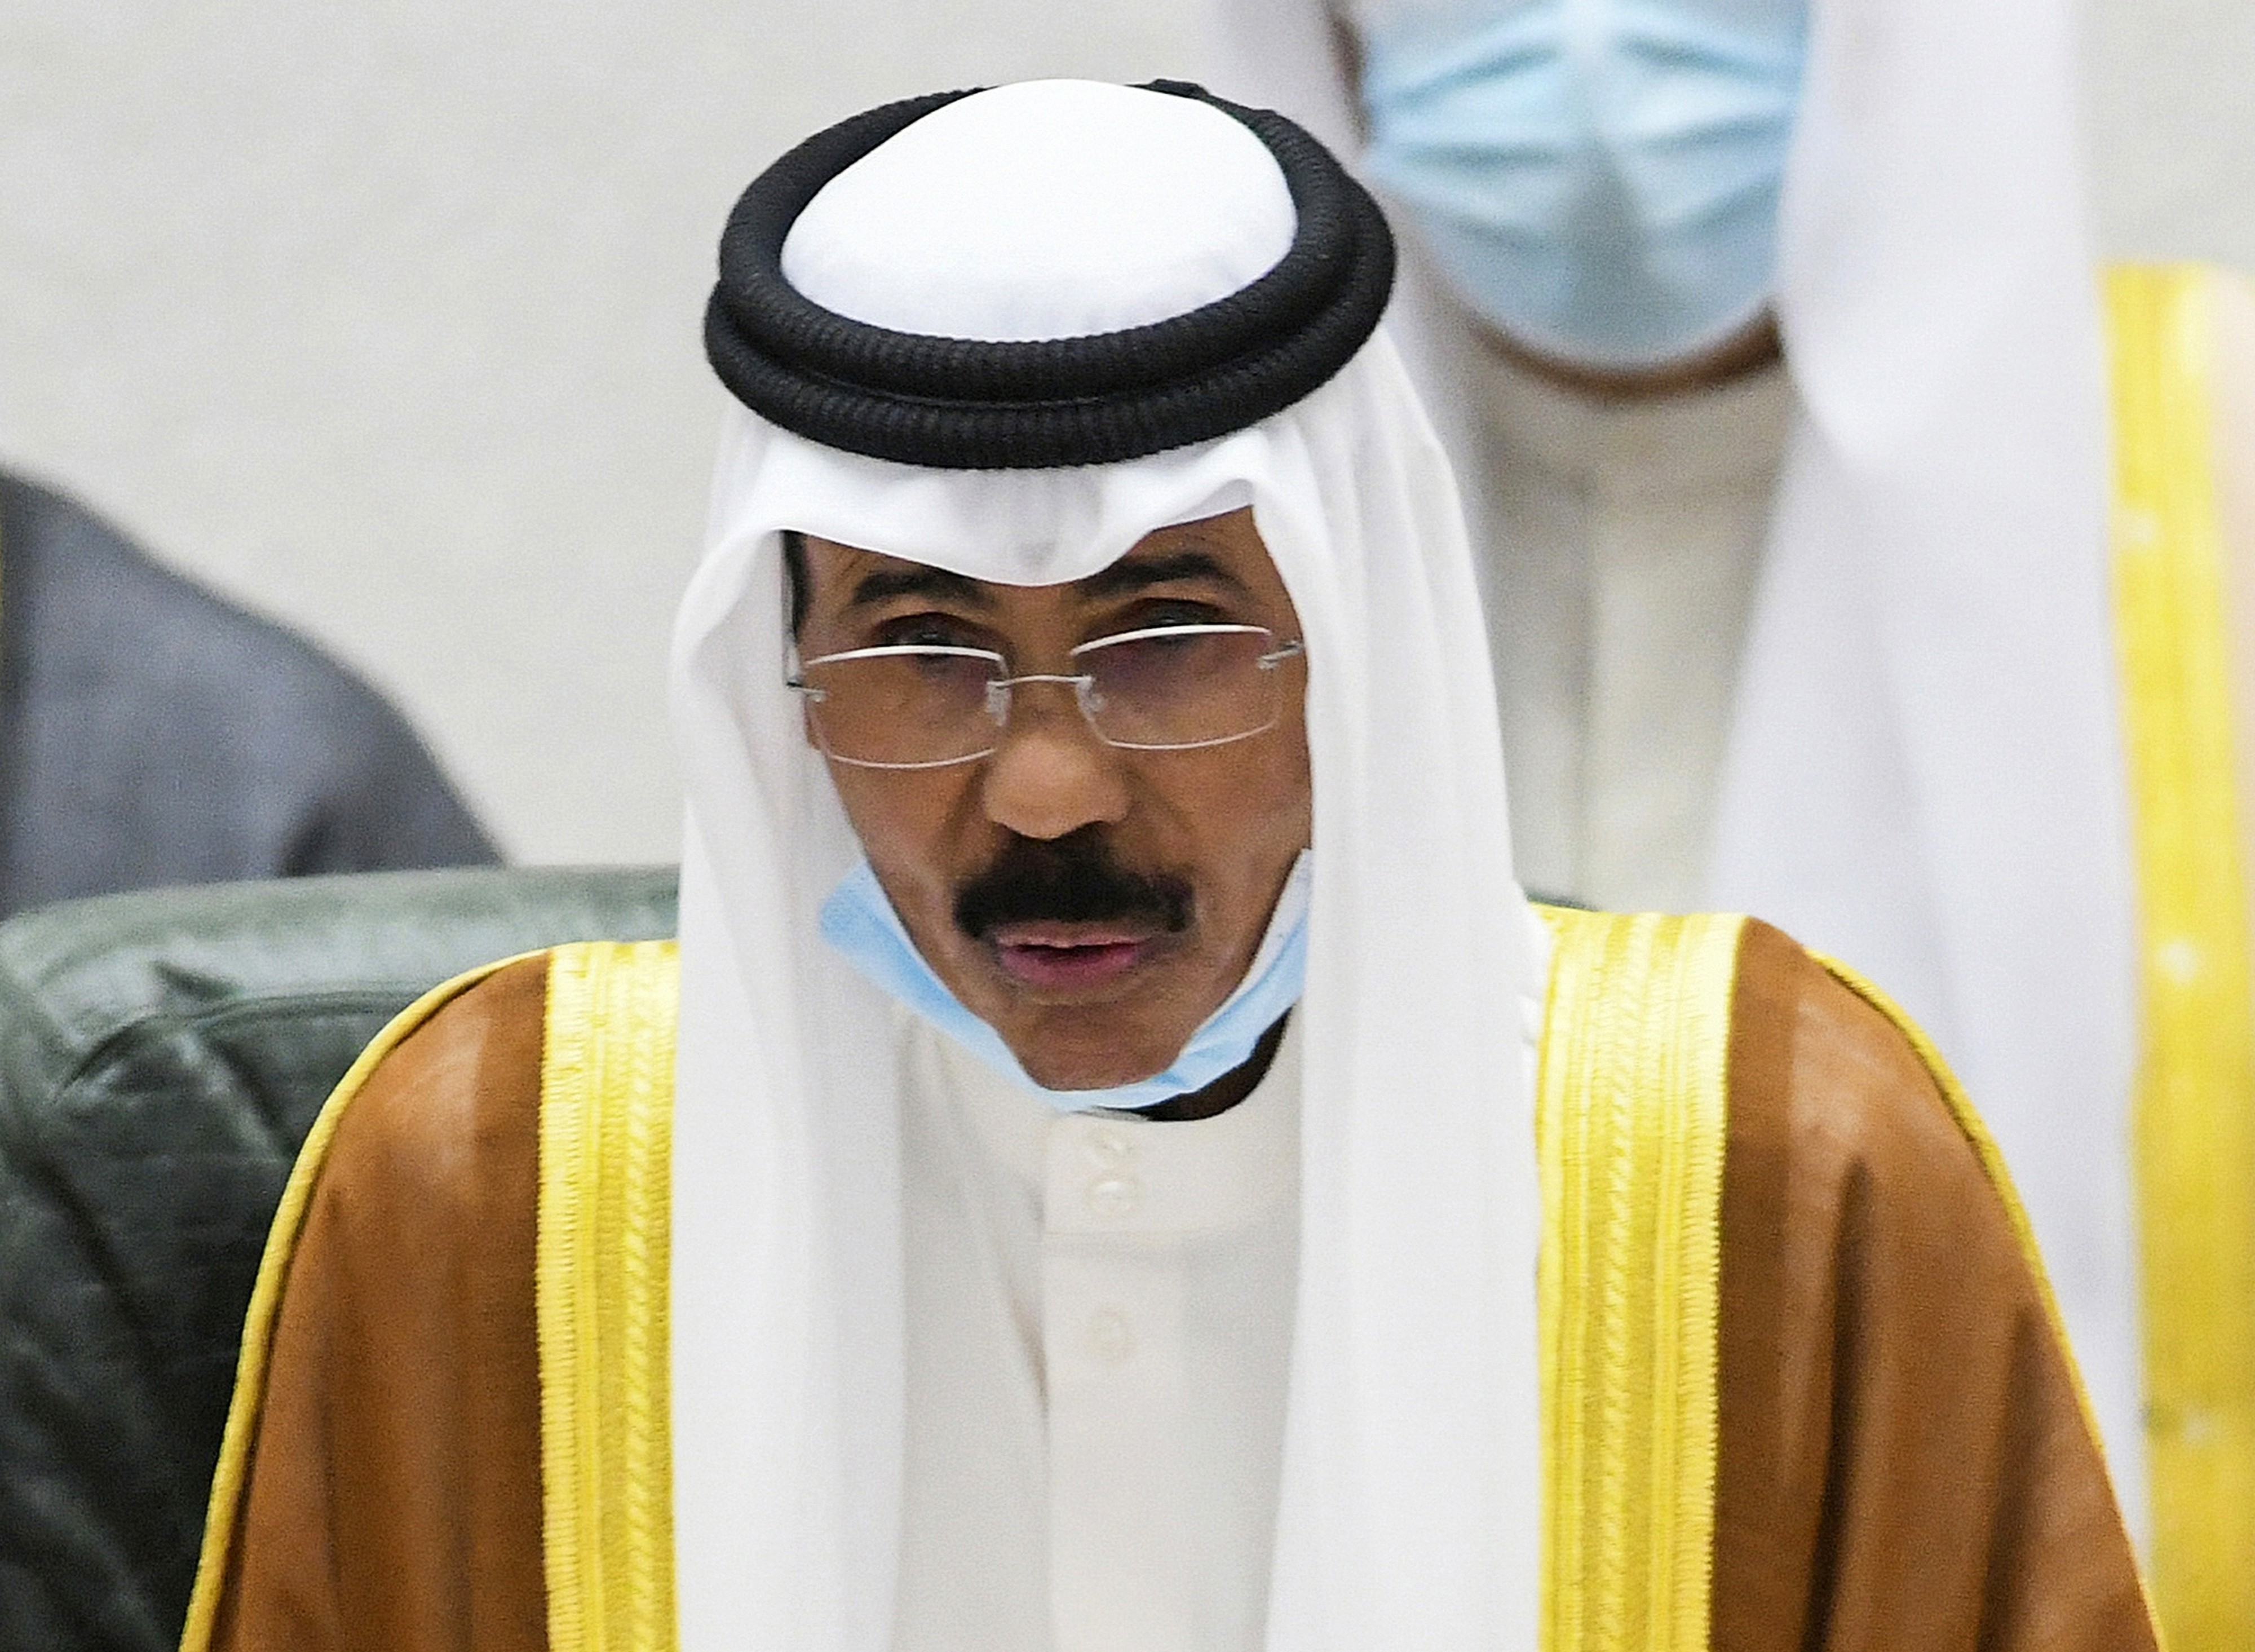 The Emir of Kuwait Sheikh Nawaf al-Ahmad al-Sabah performs the constitutional oath at the Kuwaiti National Assembly in 2020. Born in 1937, Sheikh Nawaf was the fifth son of Kuwait’s late ruler from 1921 to 1950 Sheikh Ahmad al-Jaber Al-Sabah. Photo: AP